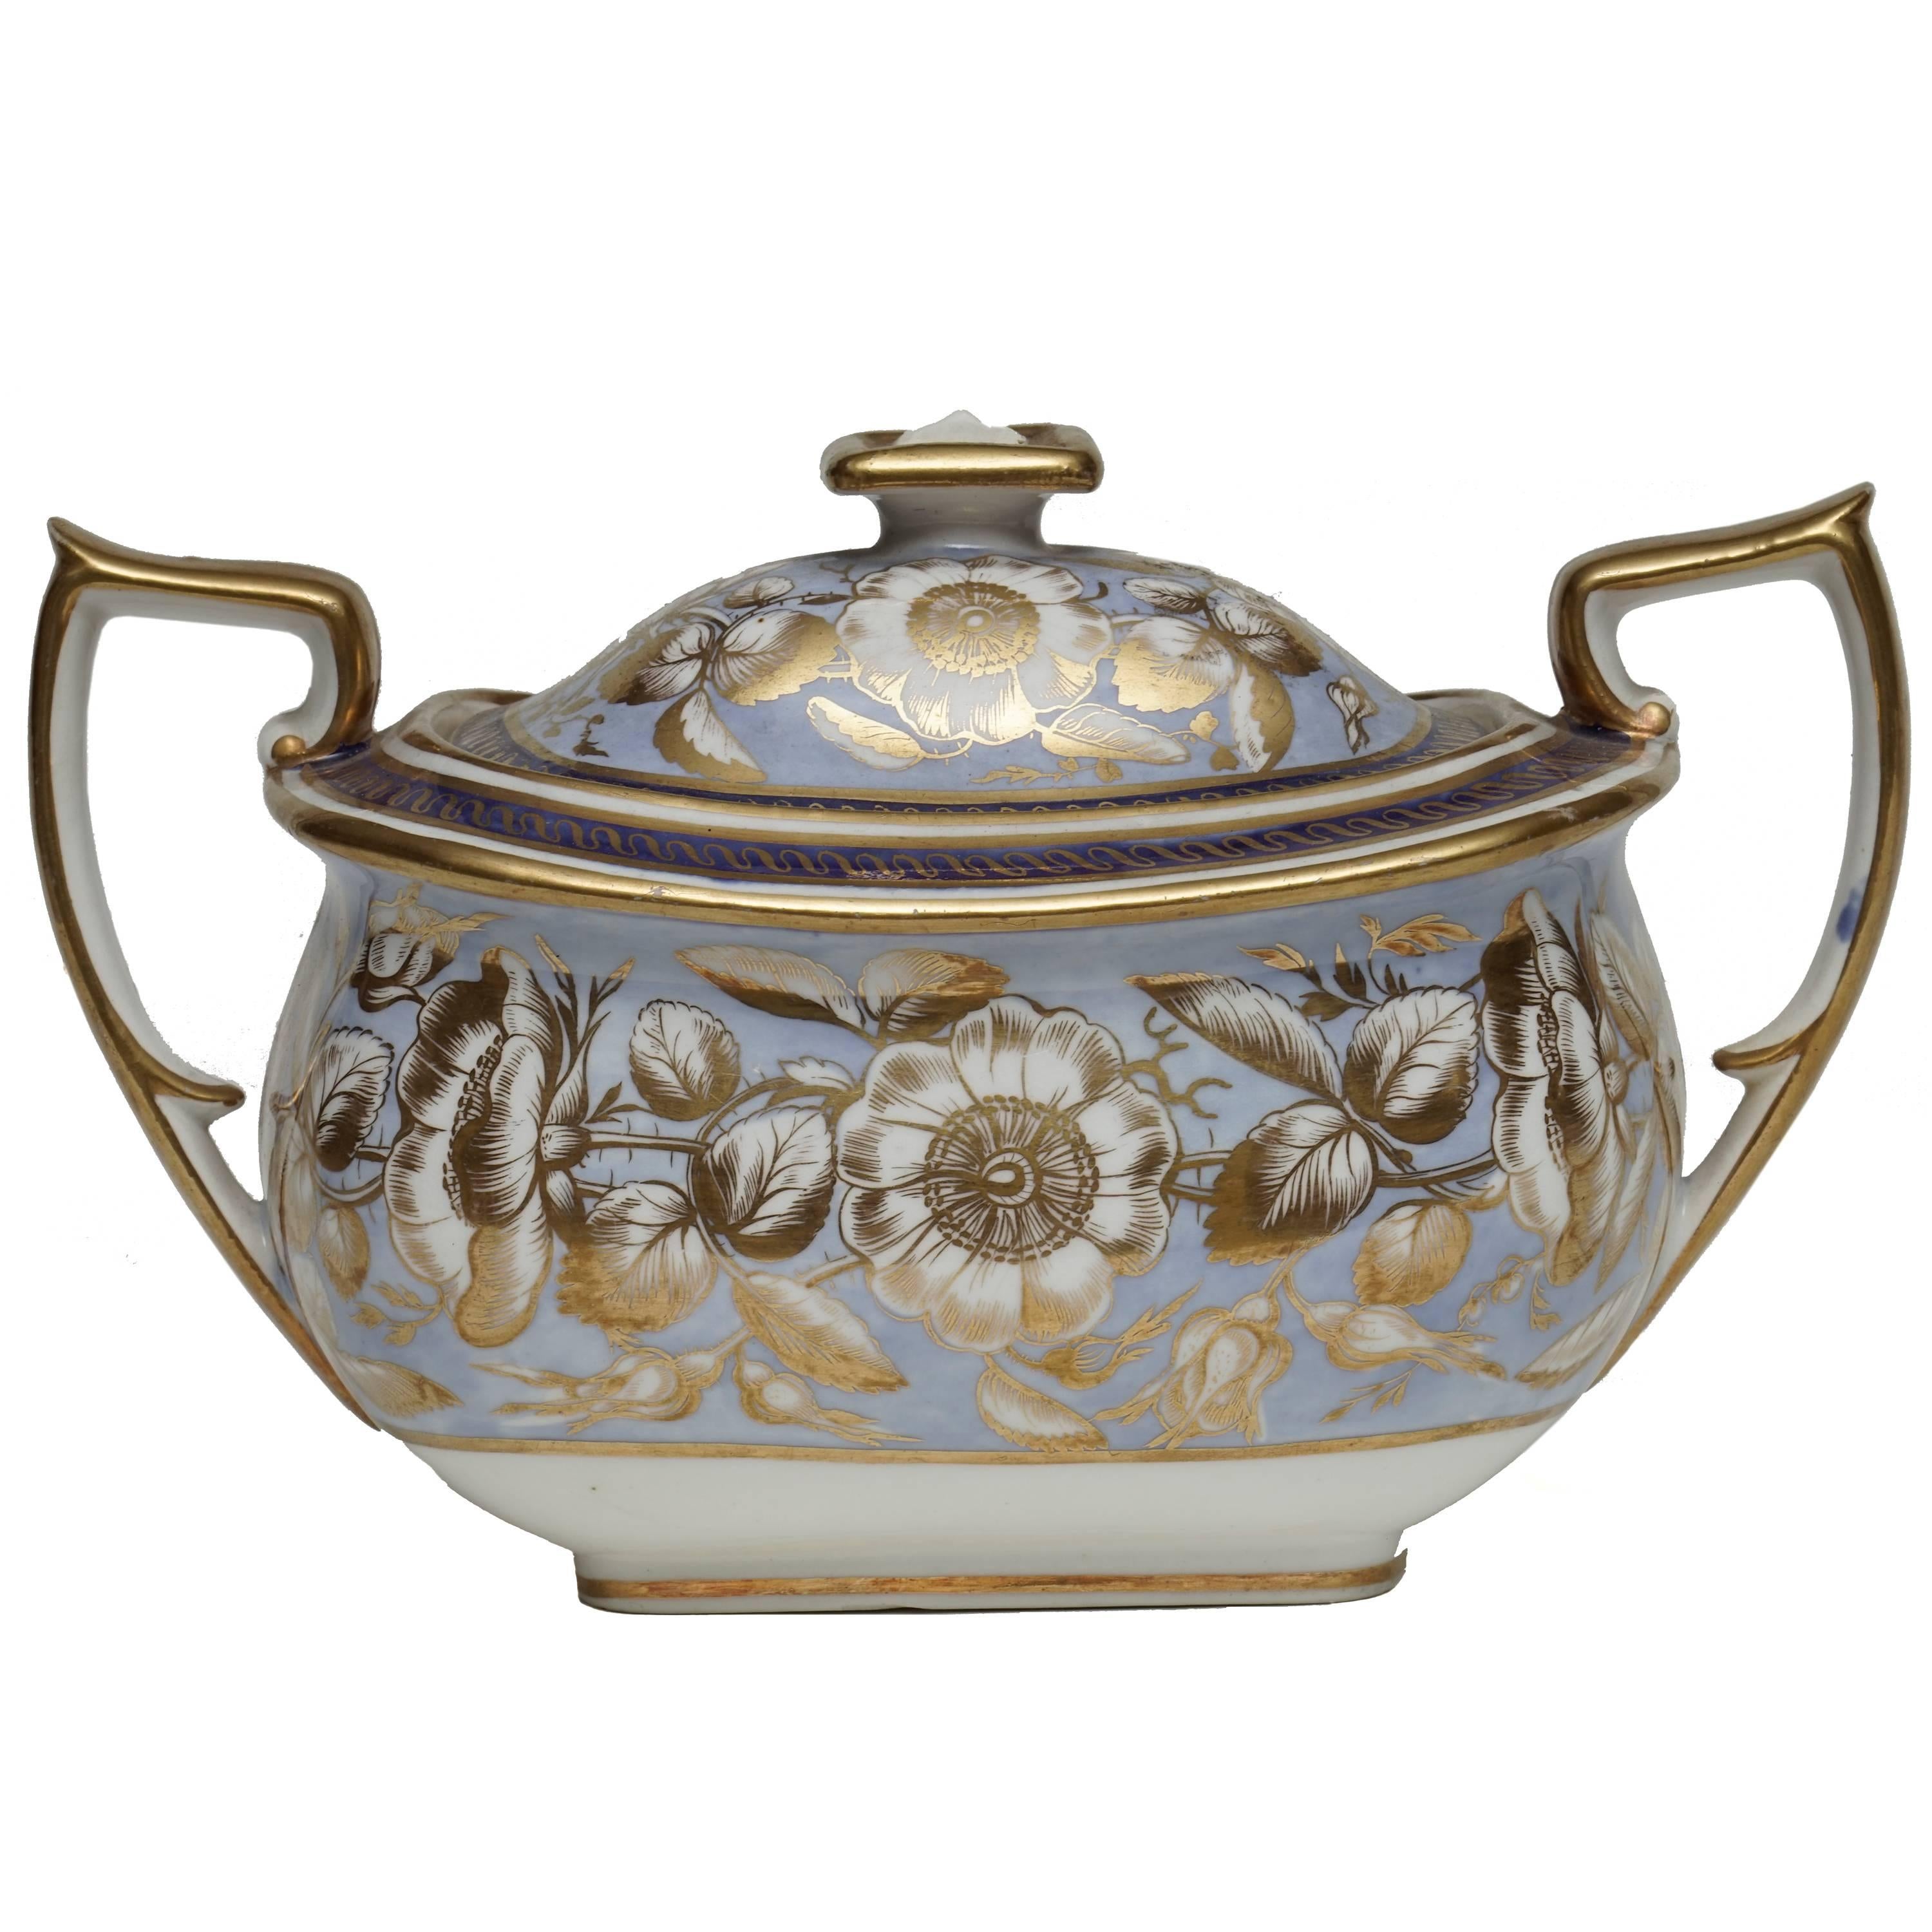 New Hall Double Handled Sugar Bowl and Cover